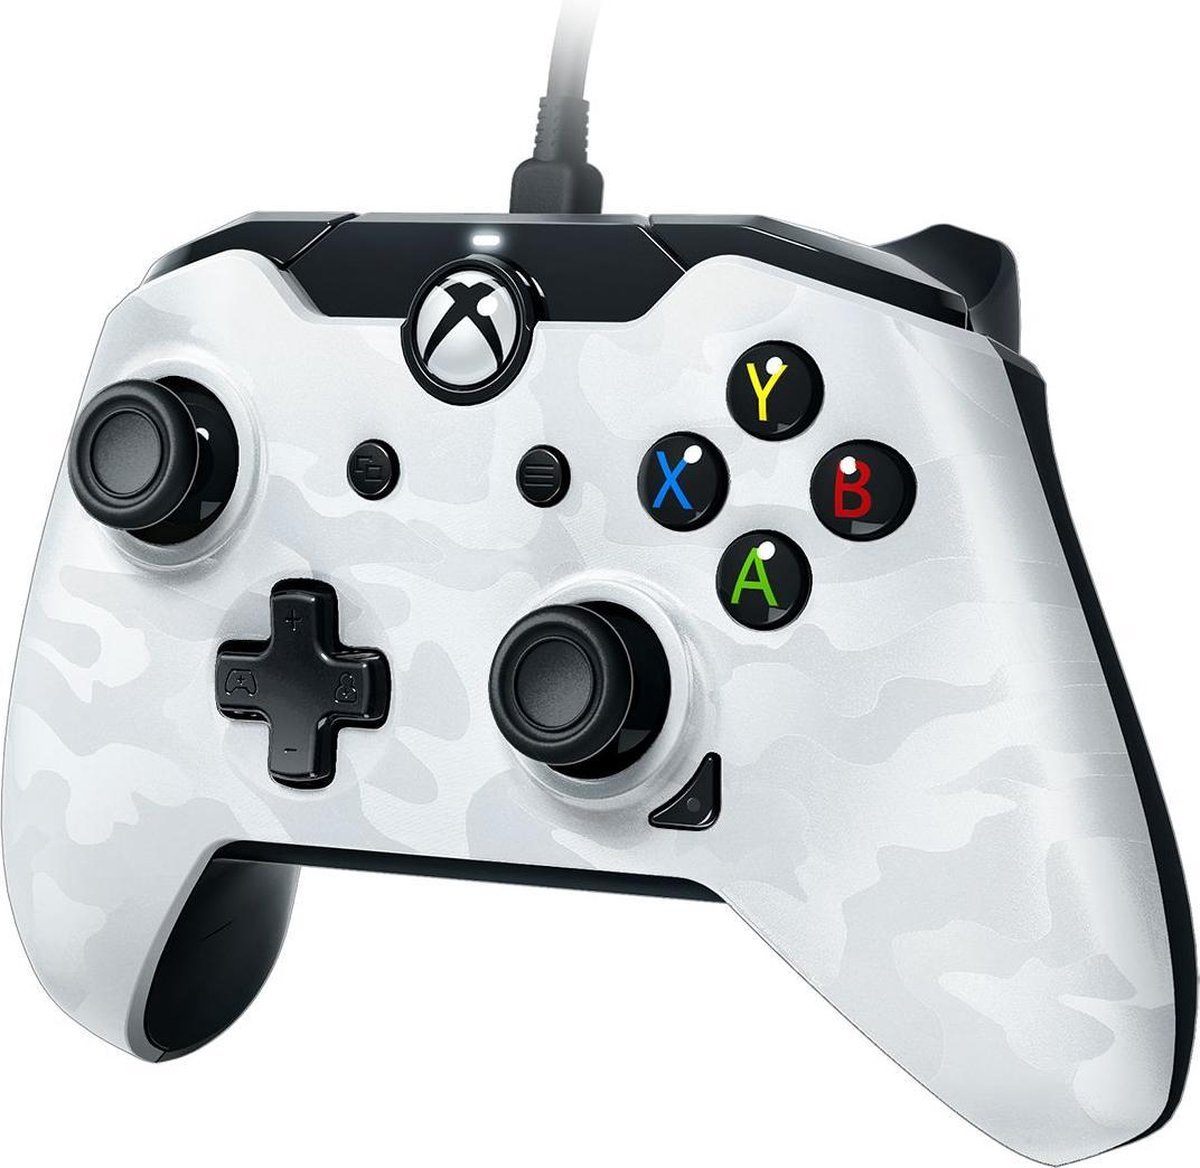 Wired Controller - White Camo (Xbox Series X/Xbox One/PC) - PDP